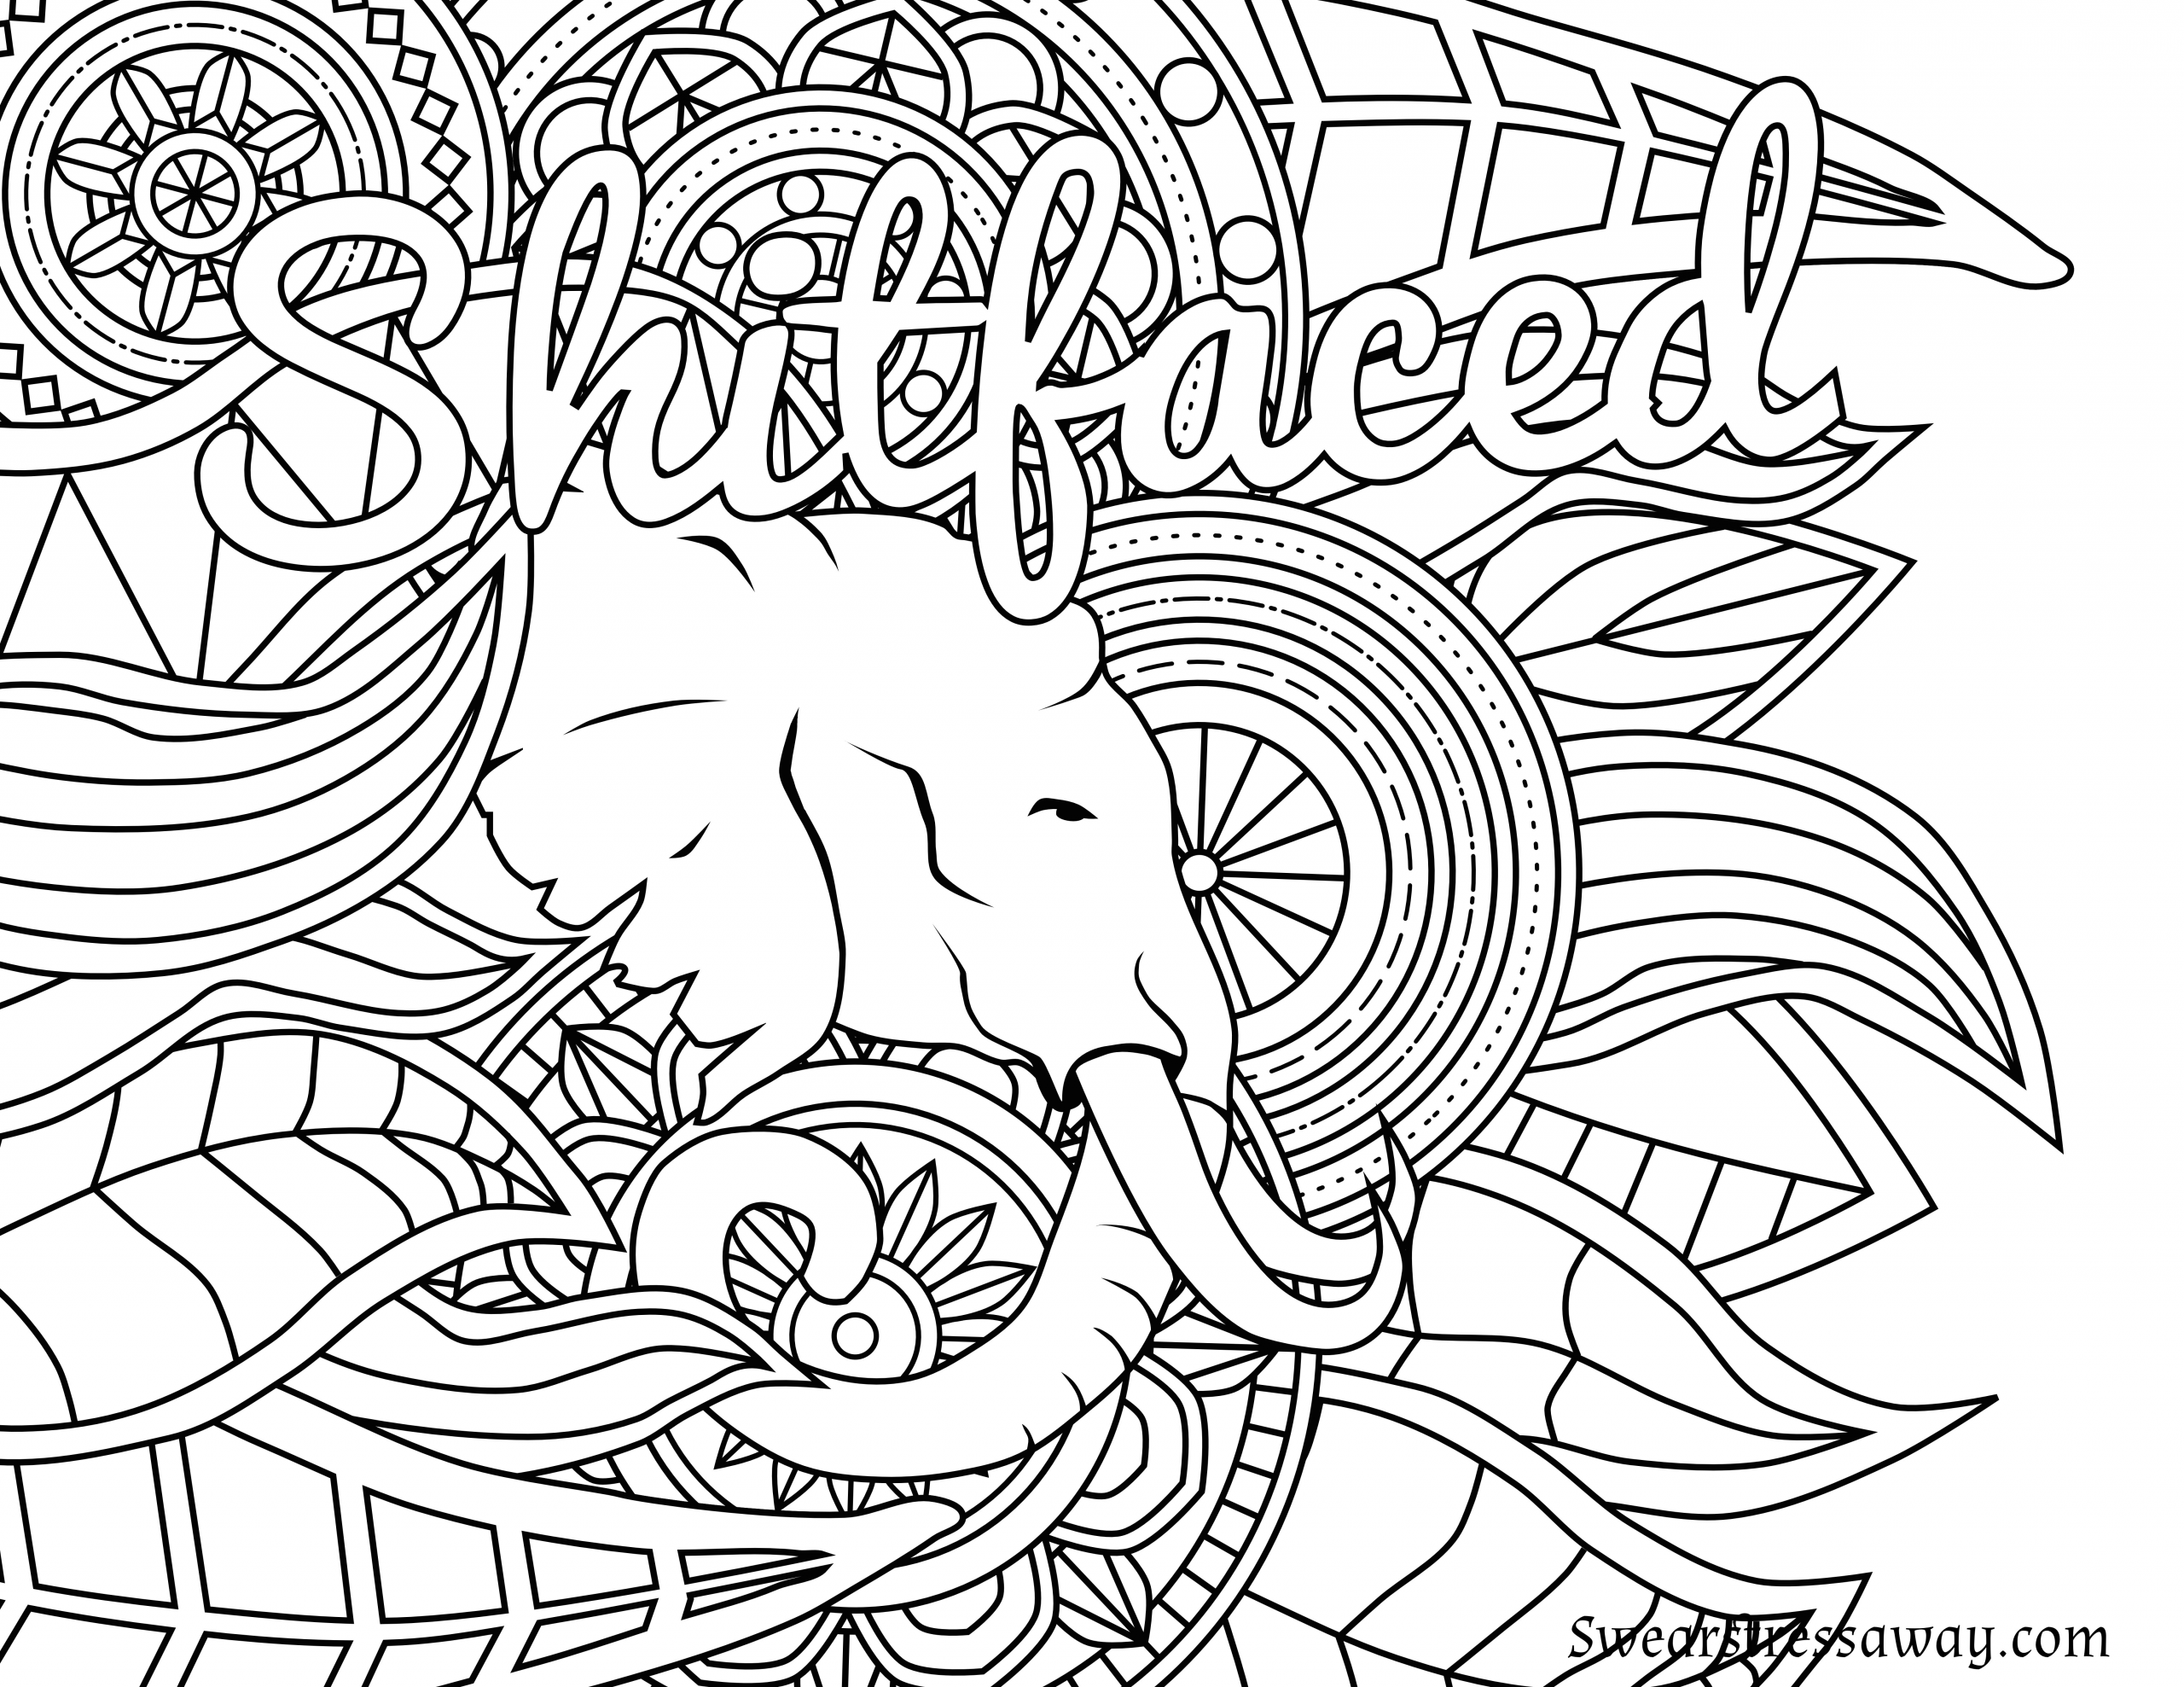 Free Printable Swear Word Coloring Pages
 Pin on Swear Word Coloring Pages